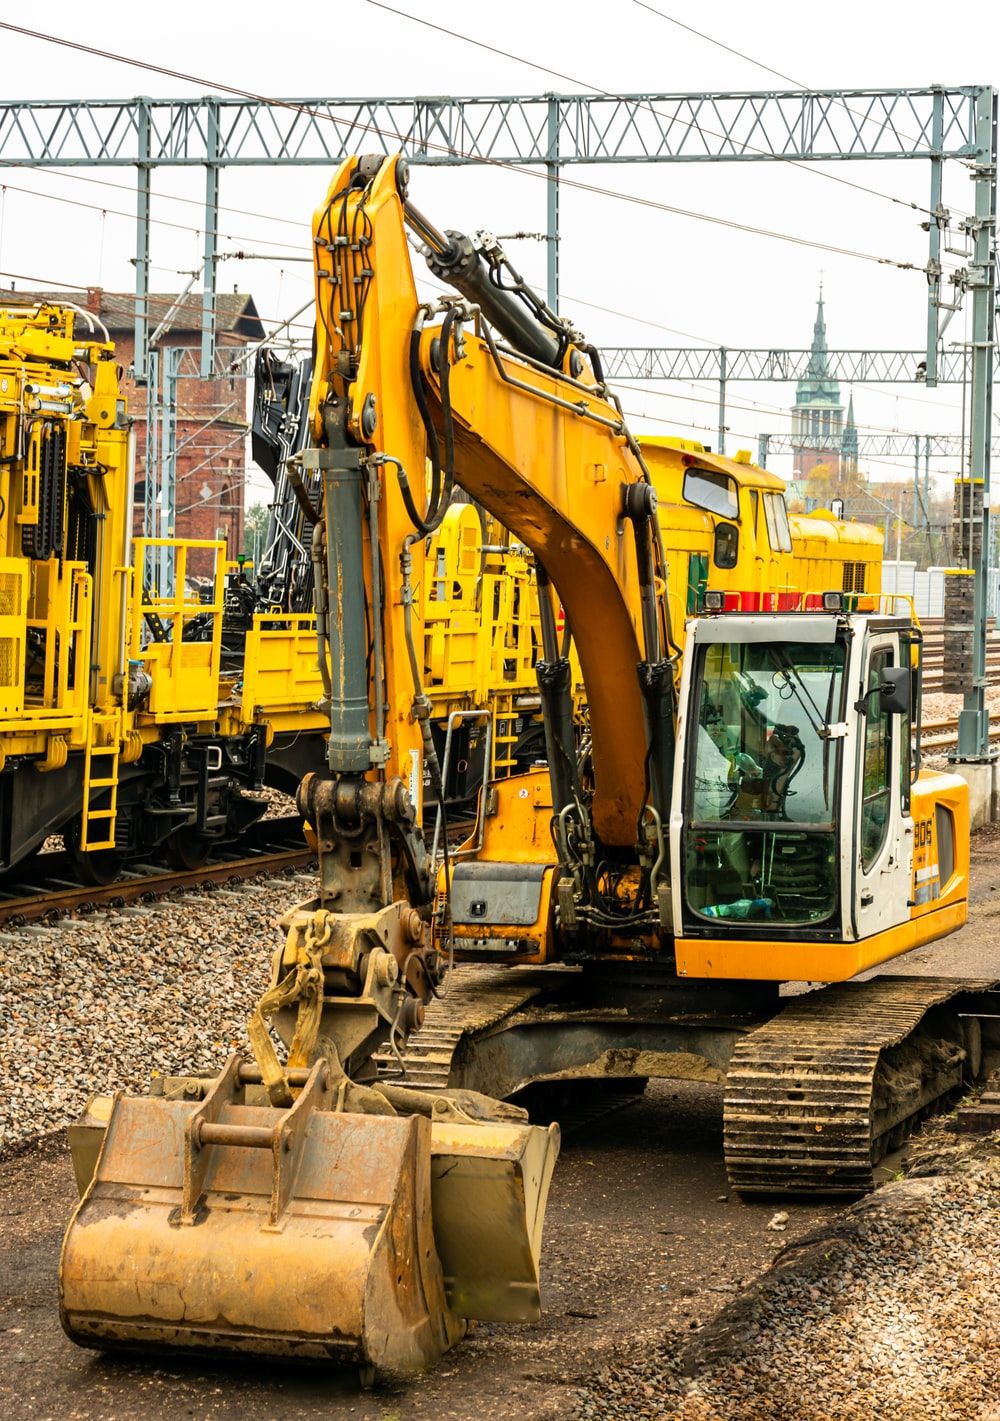 Heavy Machinery Picture. Download Free Image